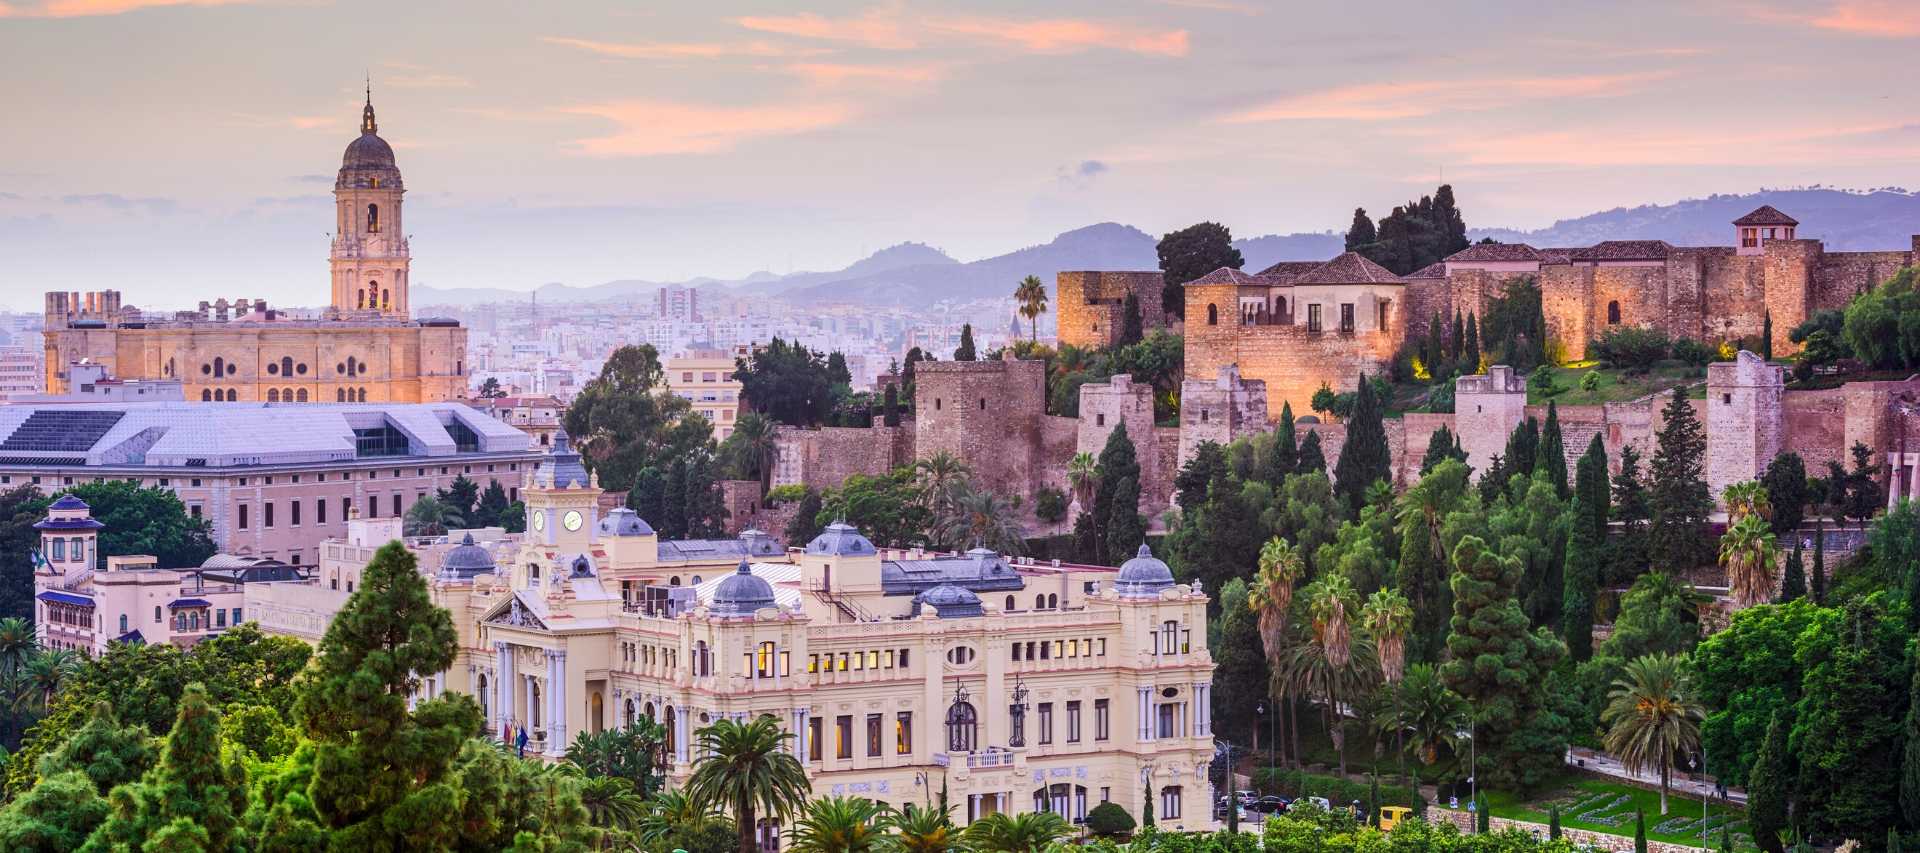 How to Spend the Perfect Weekend in Malaga